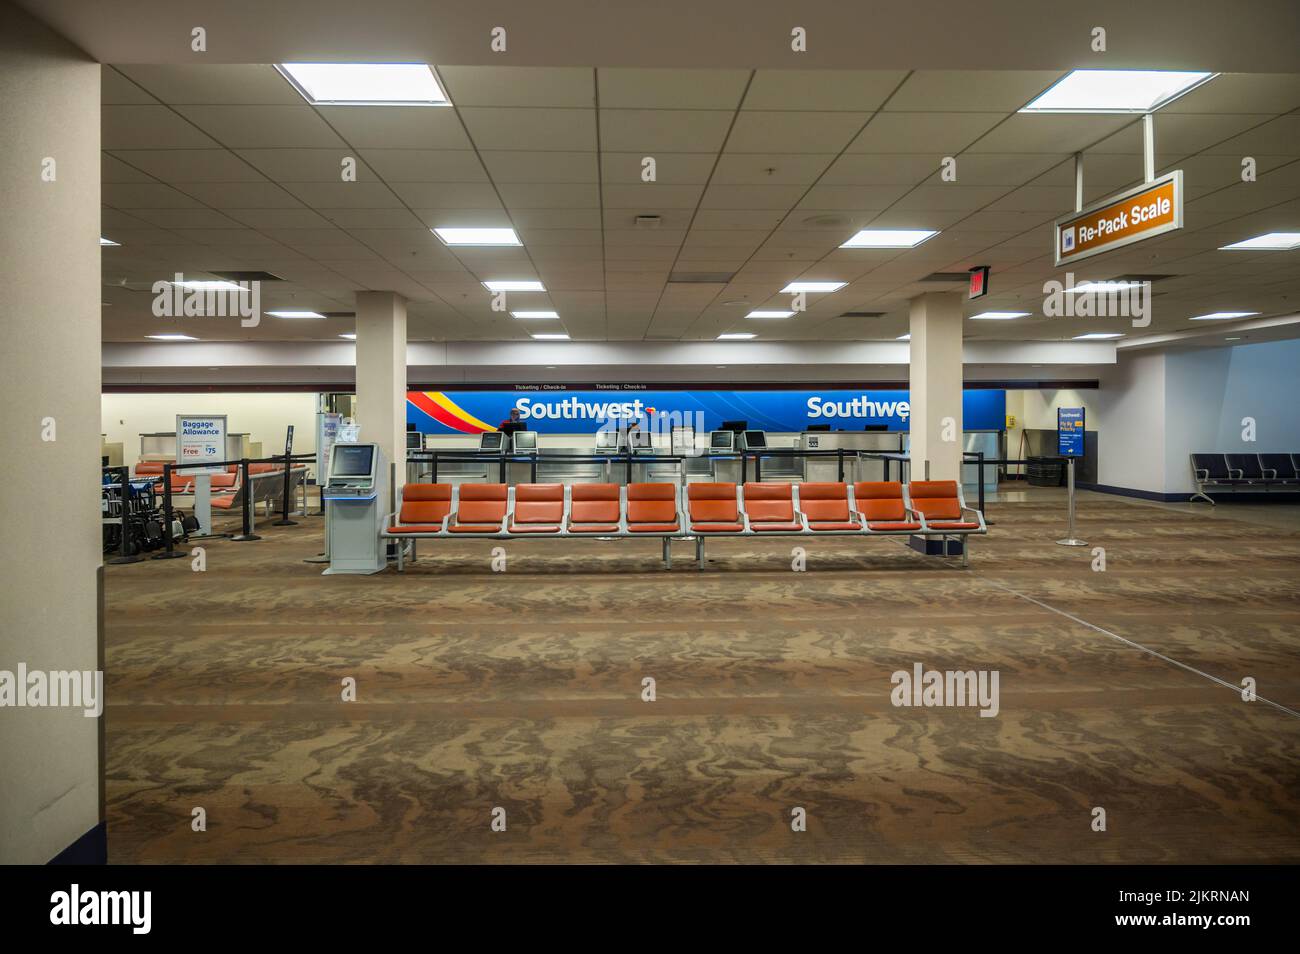 Waiting area at the Southwest Airlines terminal. Stock Photo